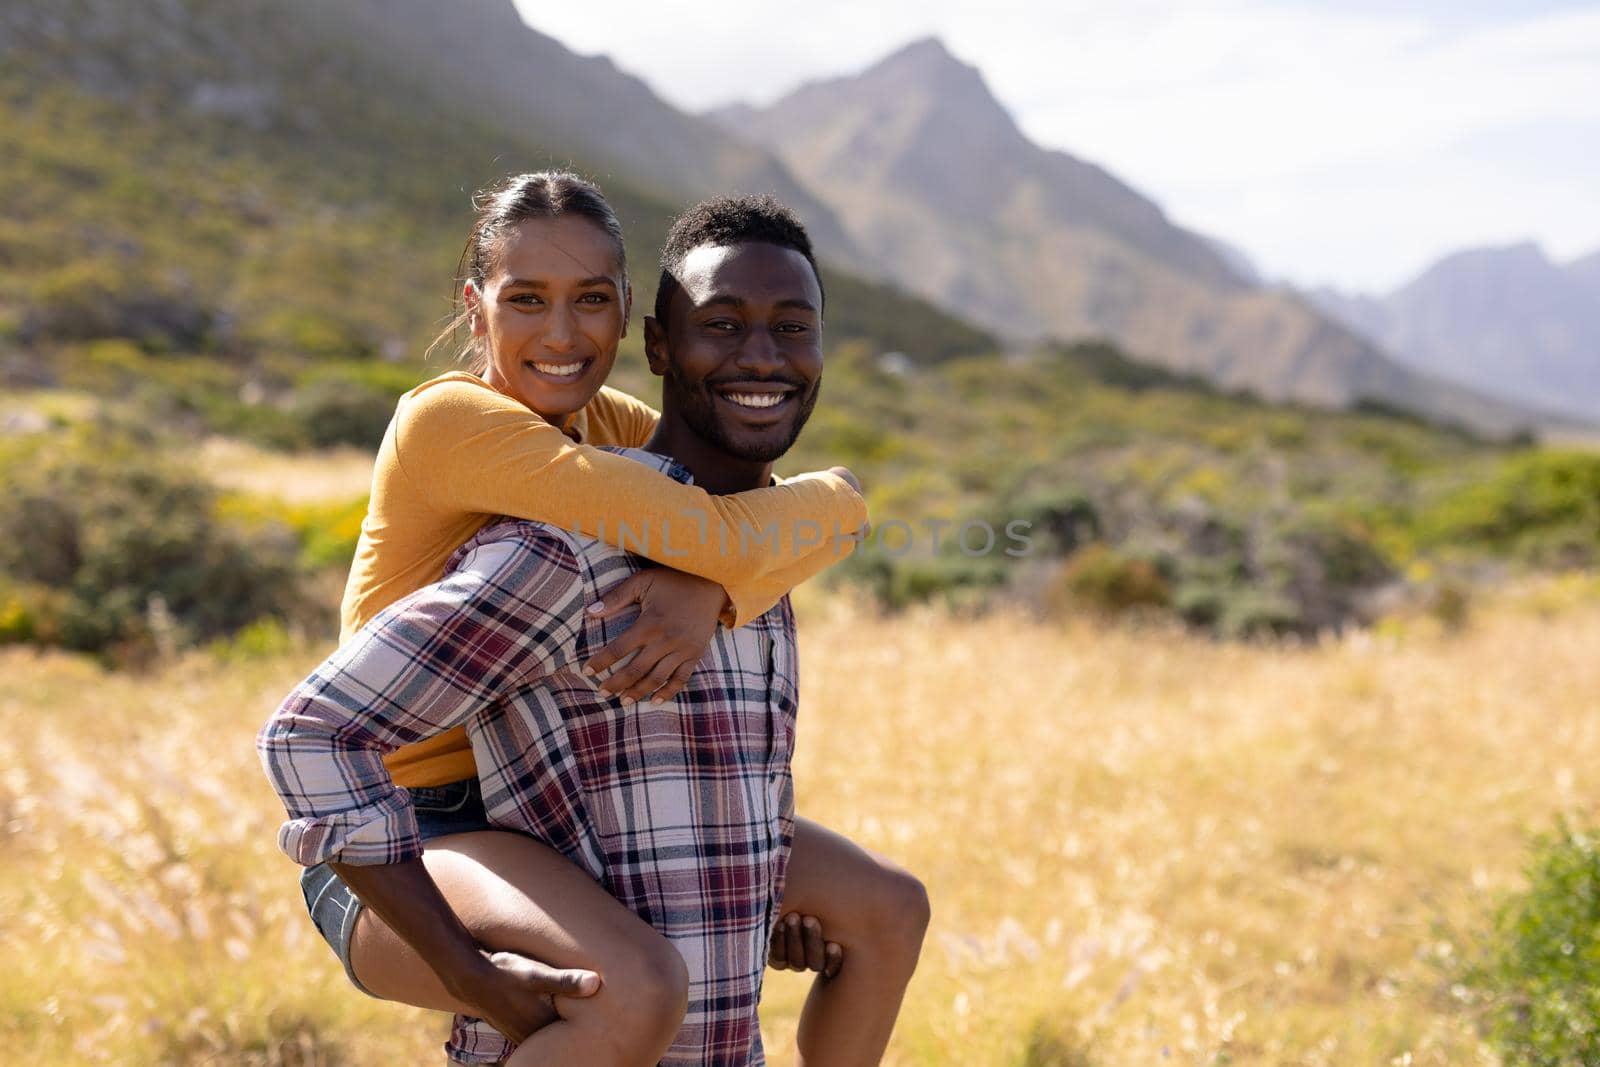 Fit african american couple resting and embracing in mountain countryside. looking at the camera and smiiling. healthy lifestyle, exercising in nature.